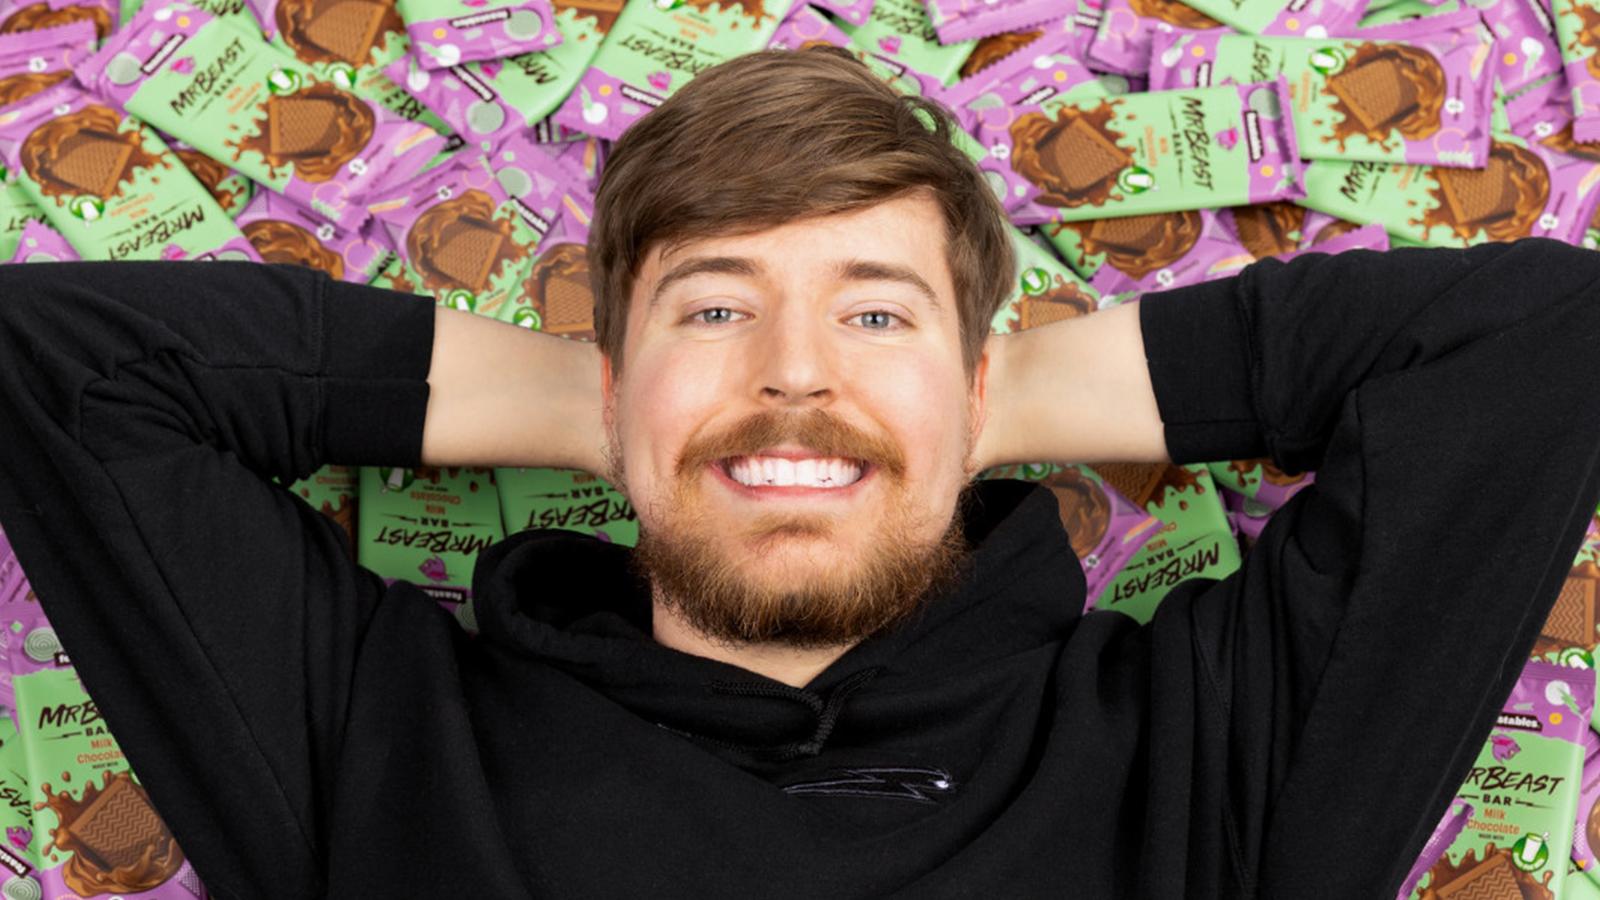 Fun fact - if you eat one of each different flavour @mrbeast